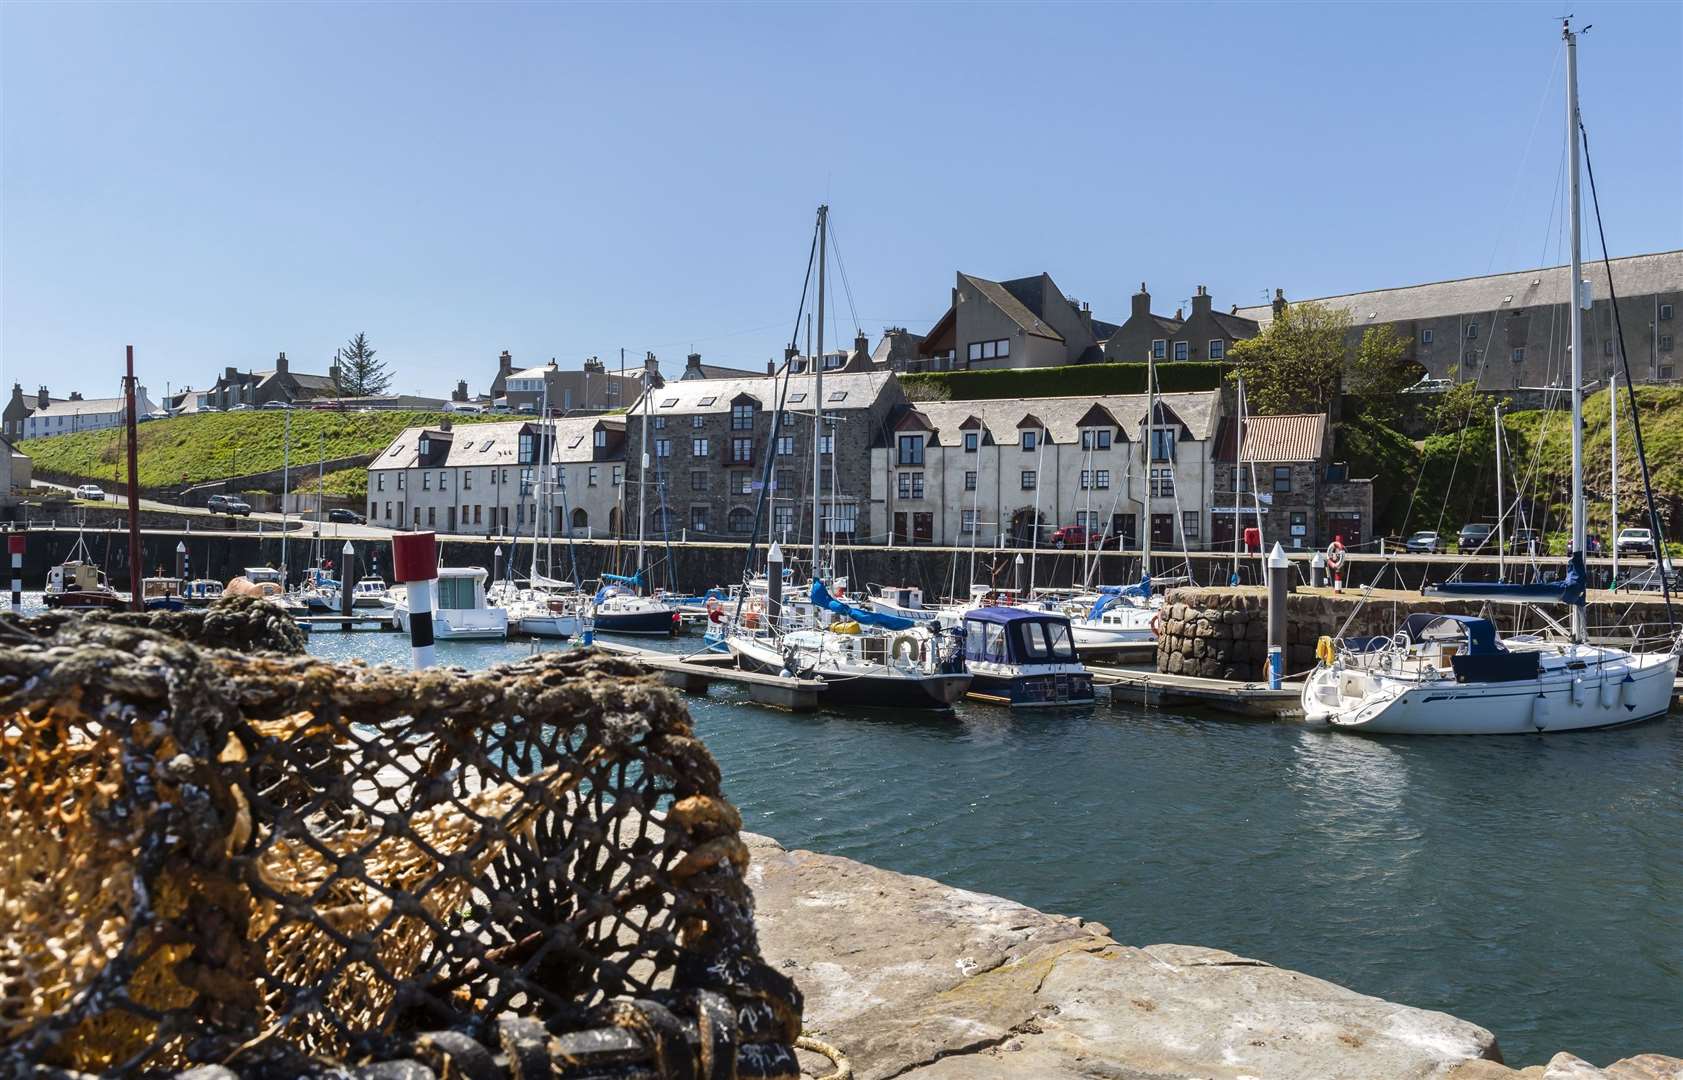 Banff harbour marina is one of seven ports operated by Aberdeenshire Council